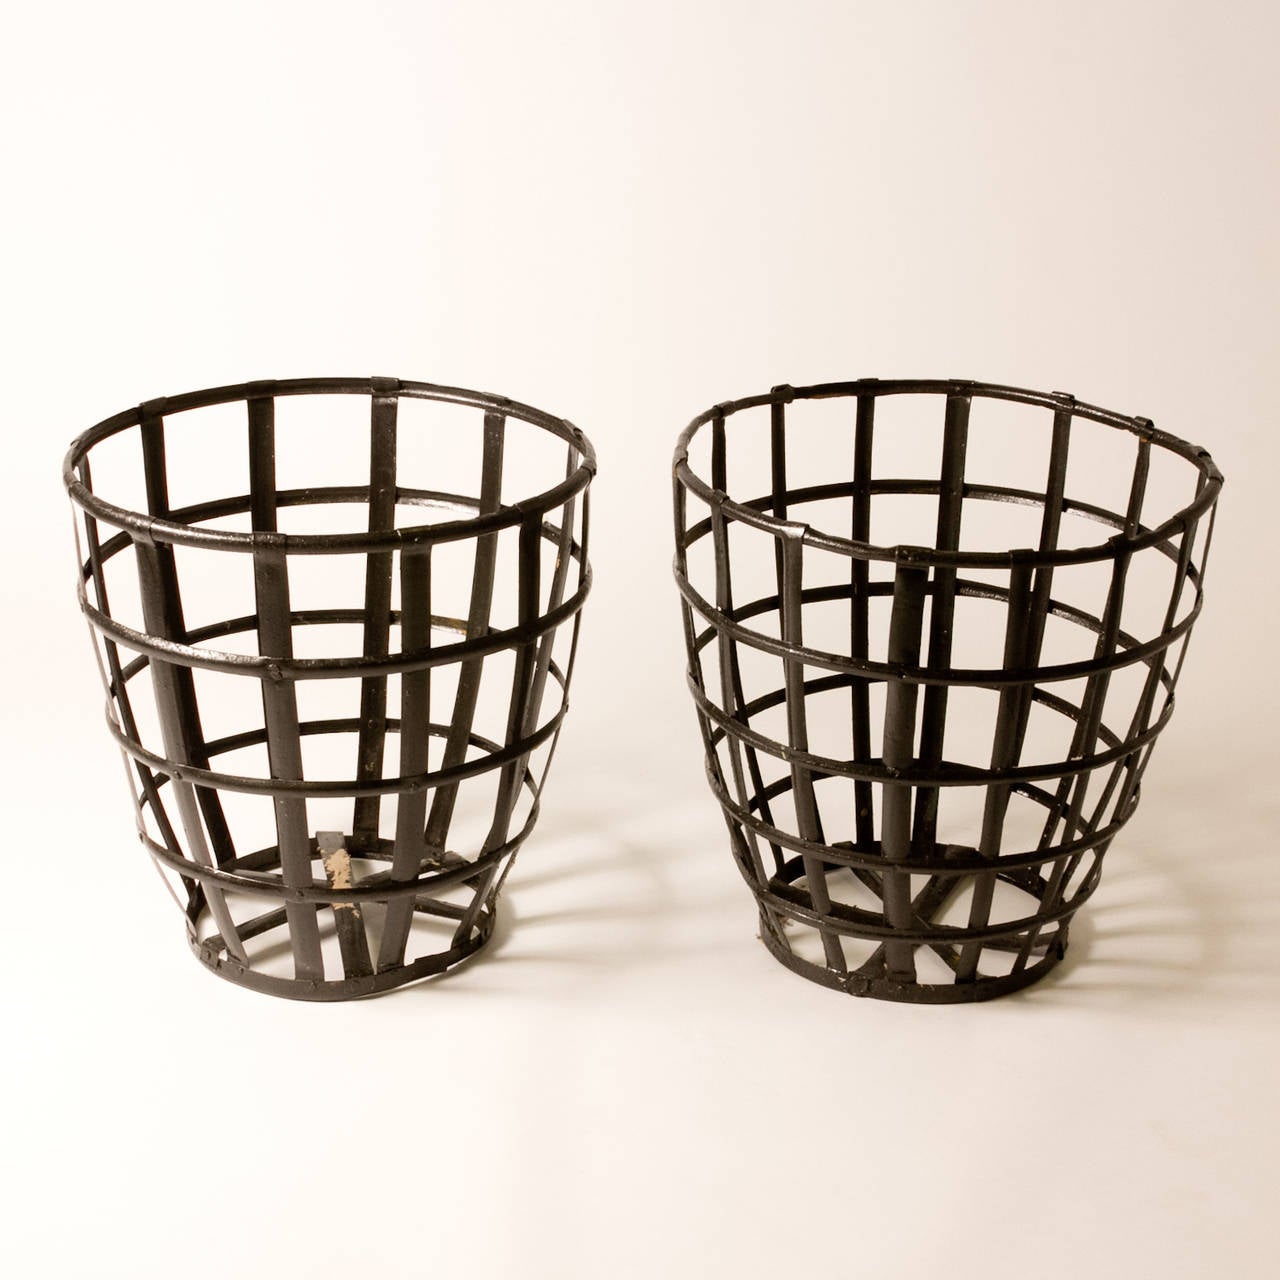 Pair of metal cage-style baskets containing two large blown-glass bottles, one green and the other clear. A beautiful piece of industrial design from turn-of-the-century France, these would work well in a garden, or as part of a table-scape or